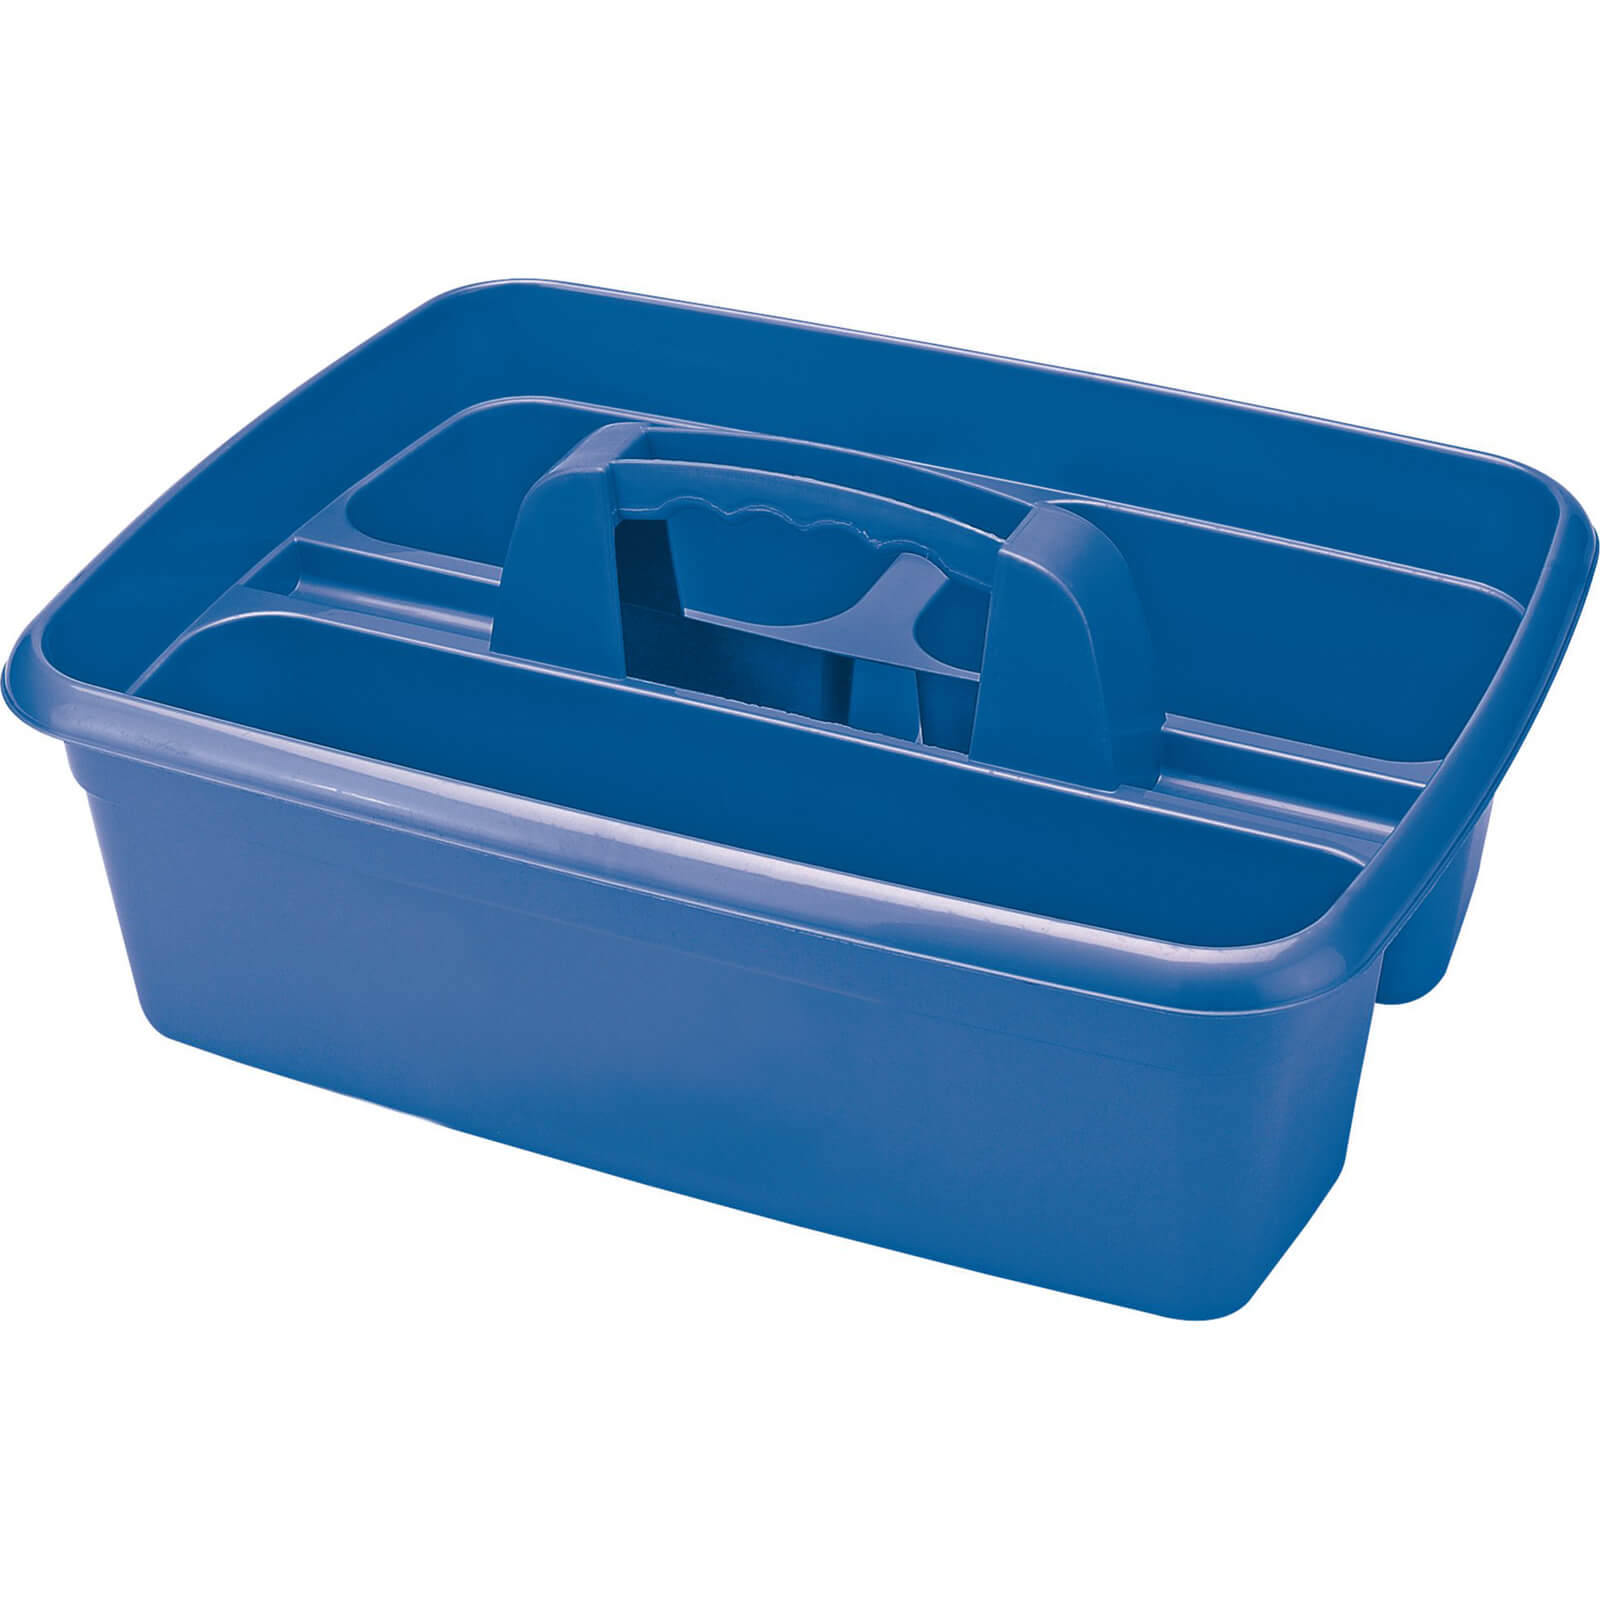 Image of Draper 3 Compartment Tool Storage Tote Tray / Cleaning Caddy